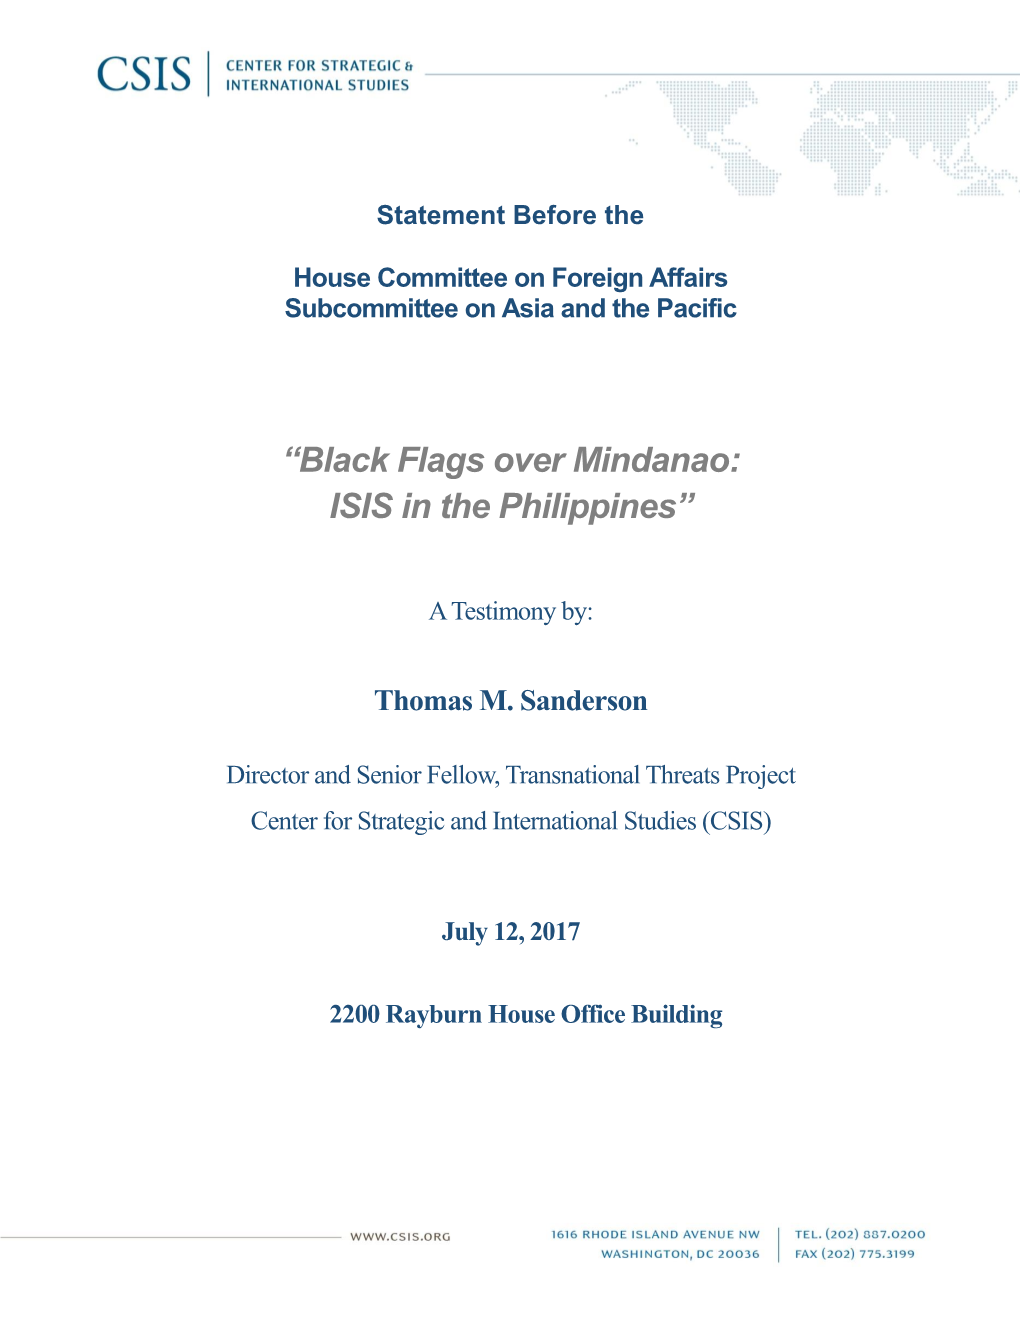 “Black Flags Over Mindanao: ISIS in the Philippines”